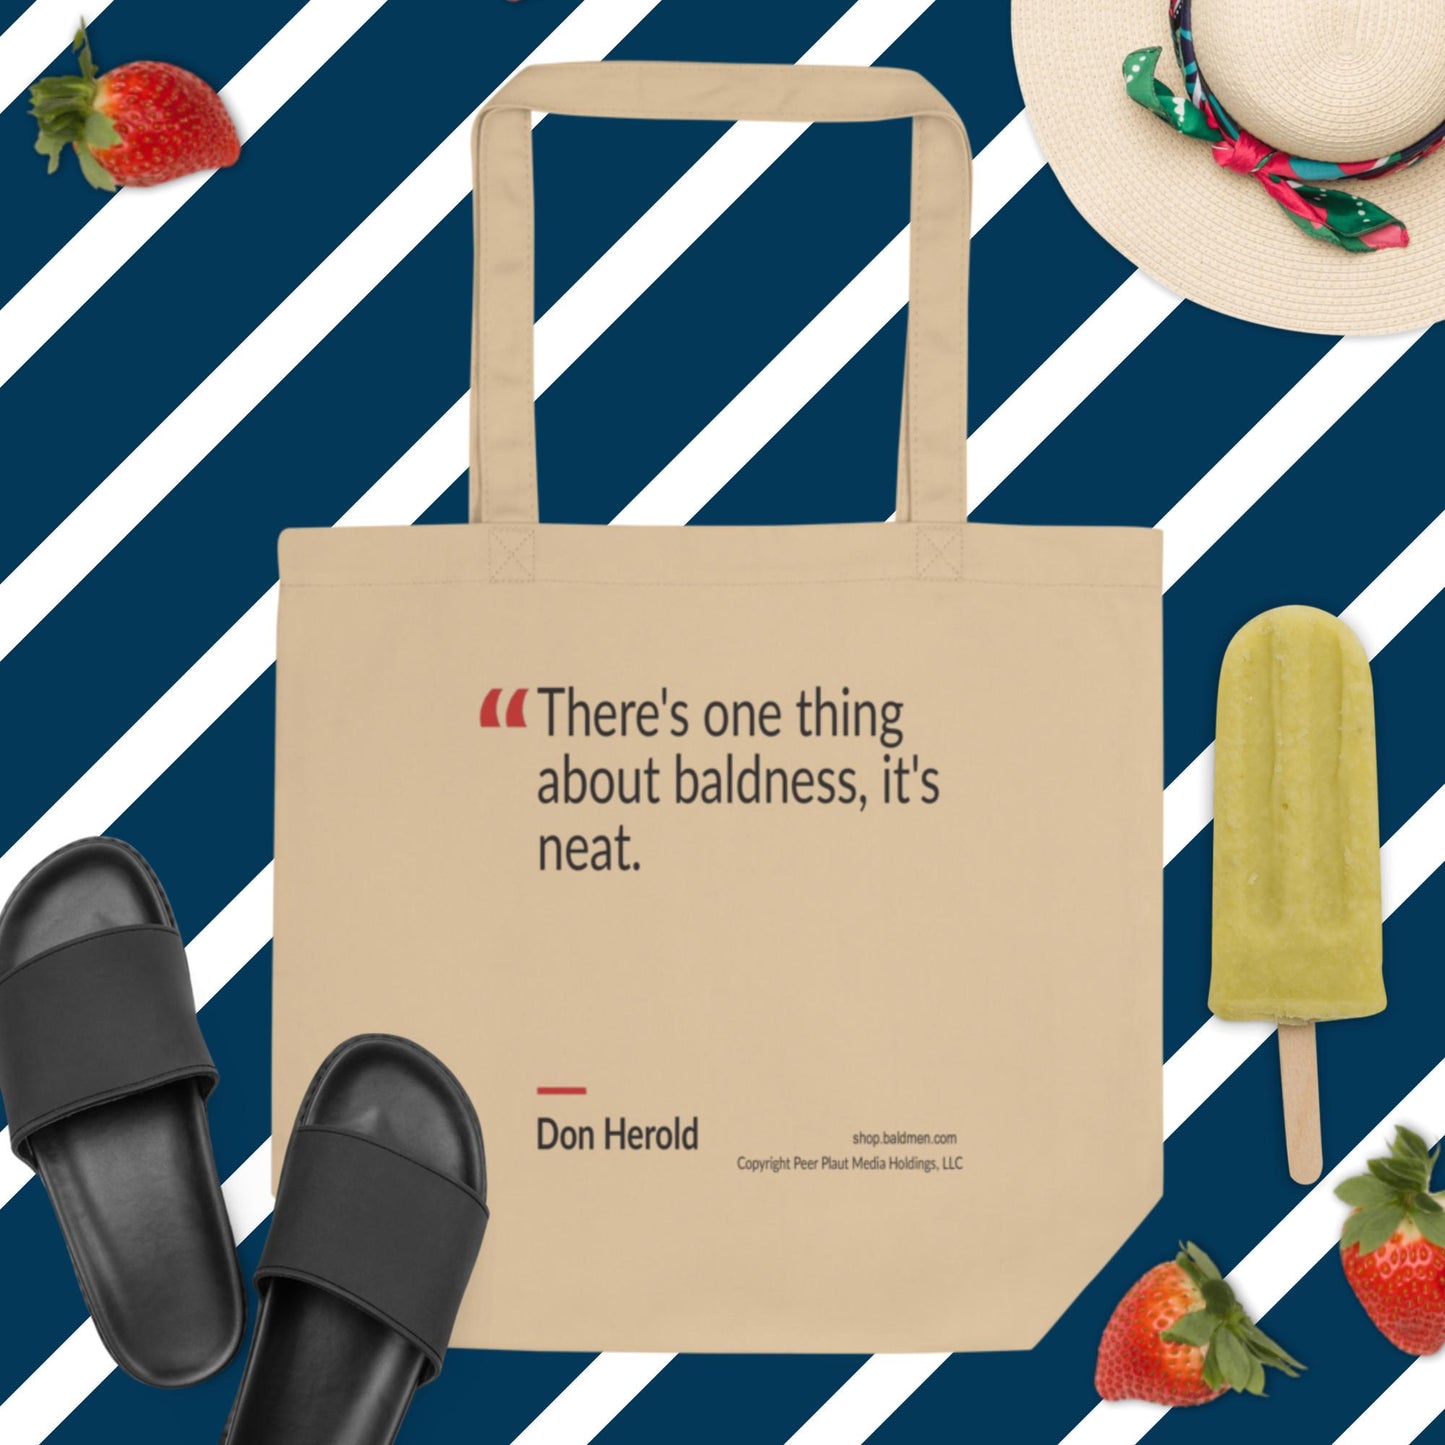 Stay neat, carry life in style with our tote, featuring Don Herold's timeless quote.